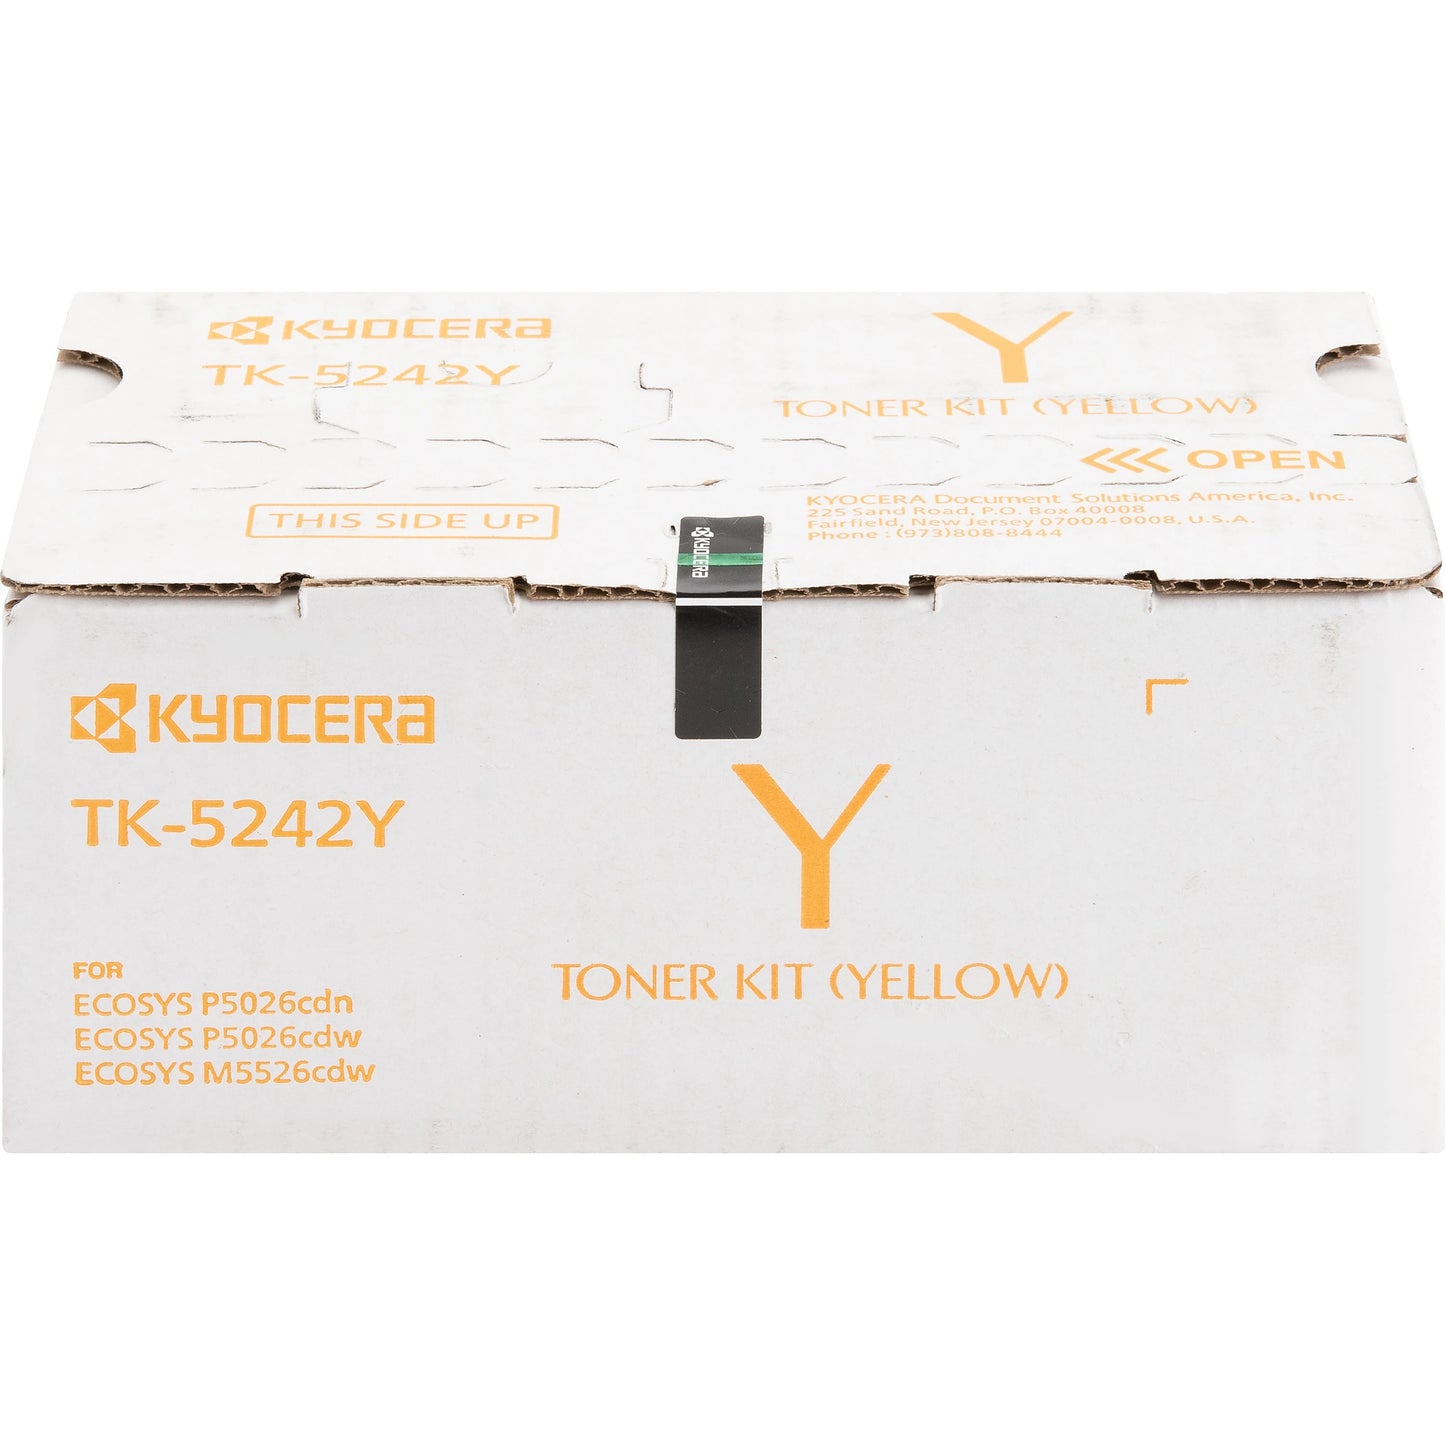 Kyocera TK-5242Y Yellow Toner Cartridge (High Yield - 3,000 Pages)